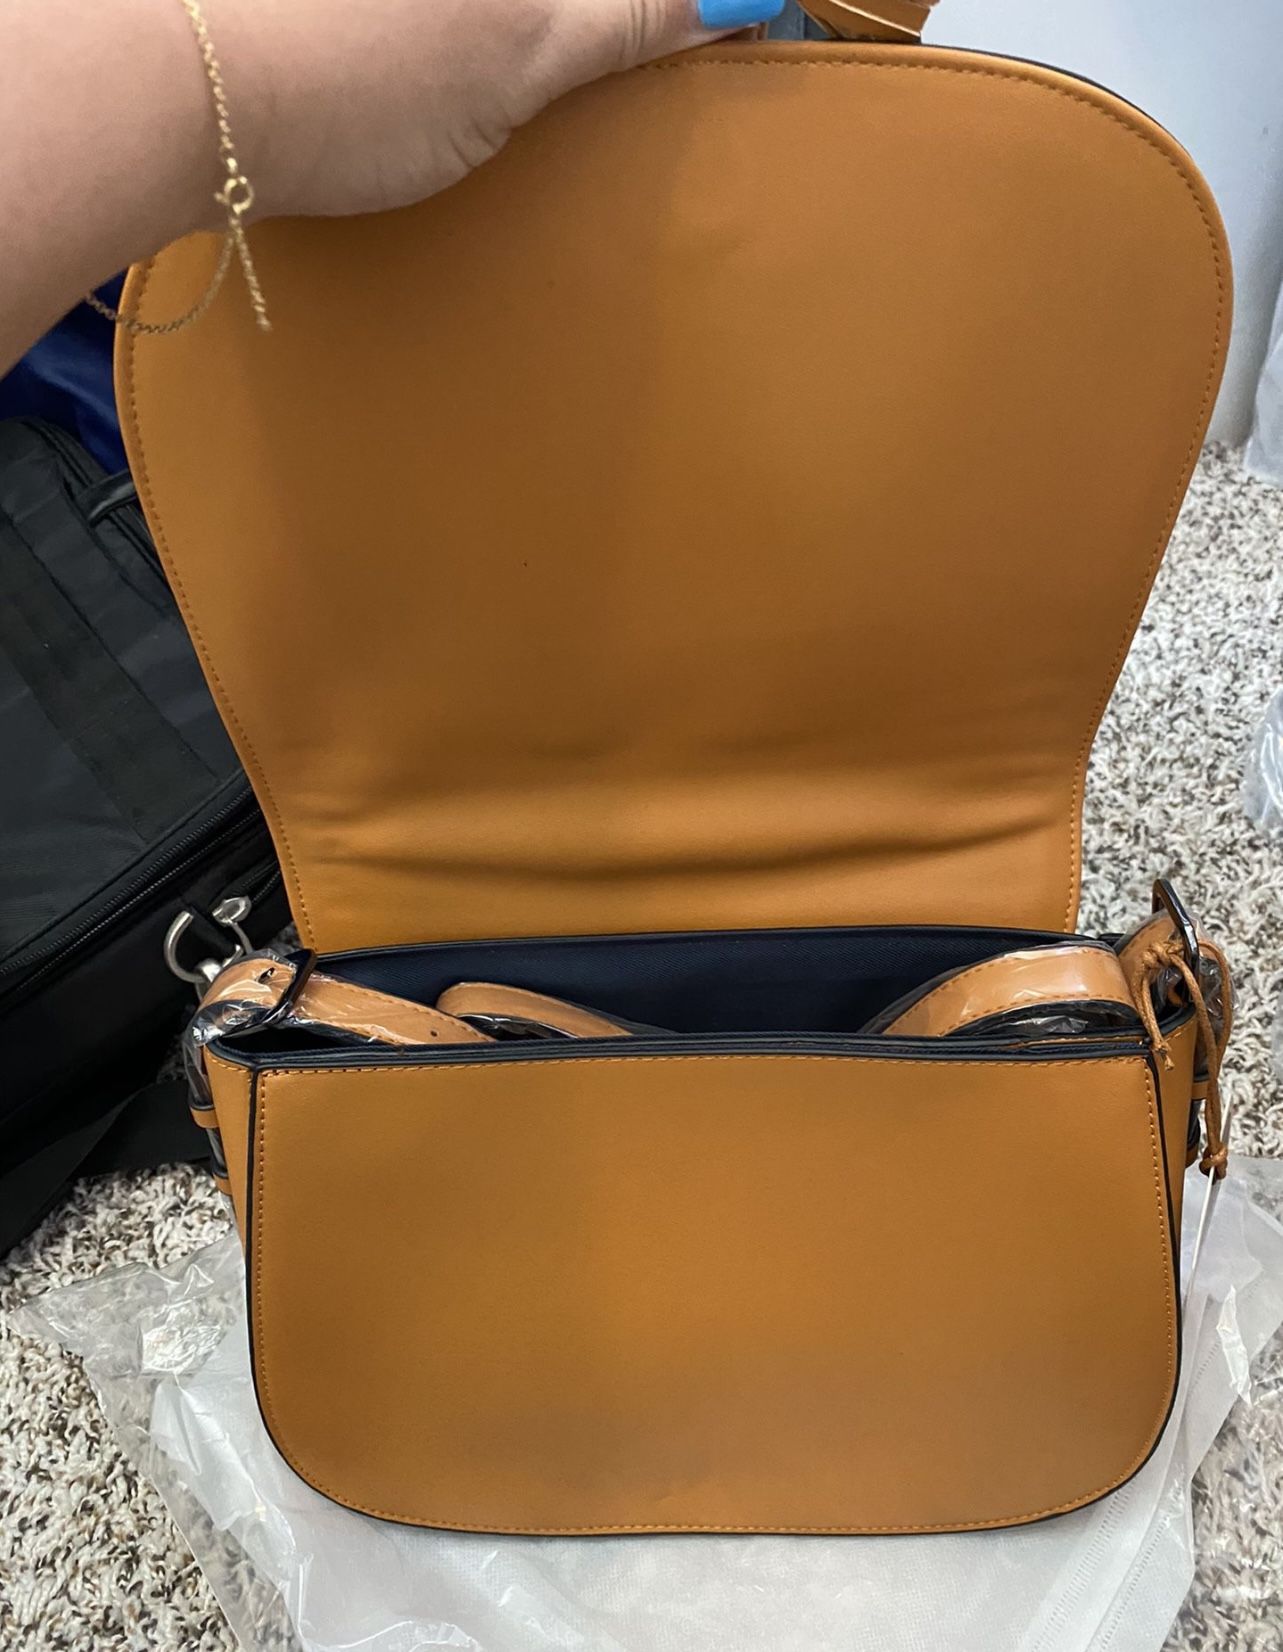 Name Brand Crossbody Backpack And Coin Purse for Sale in Mount Pleasant, TX  - OfferUp